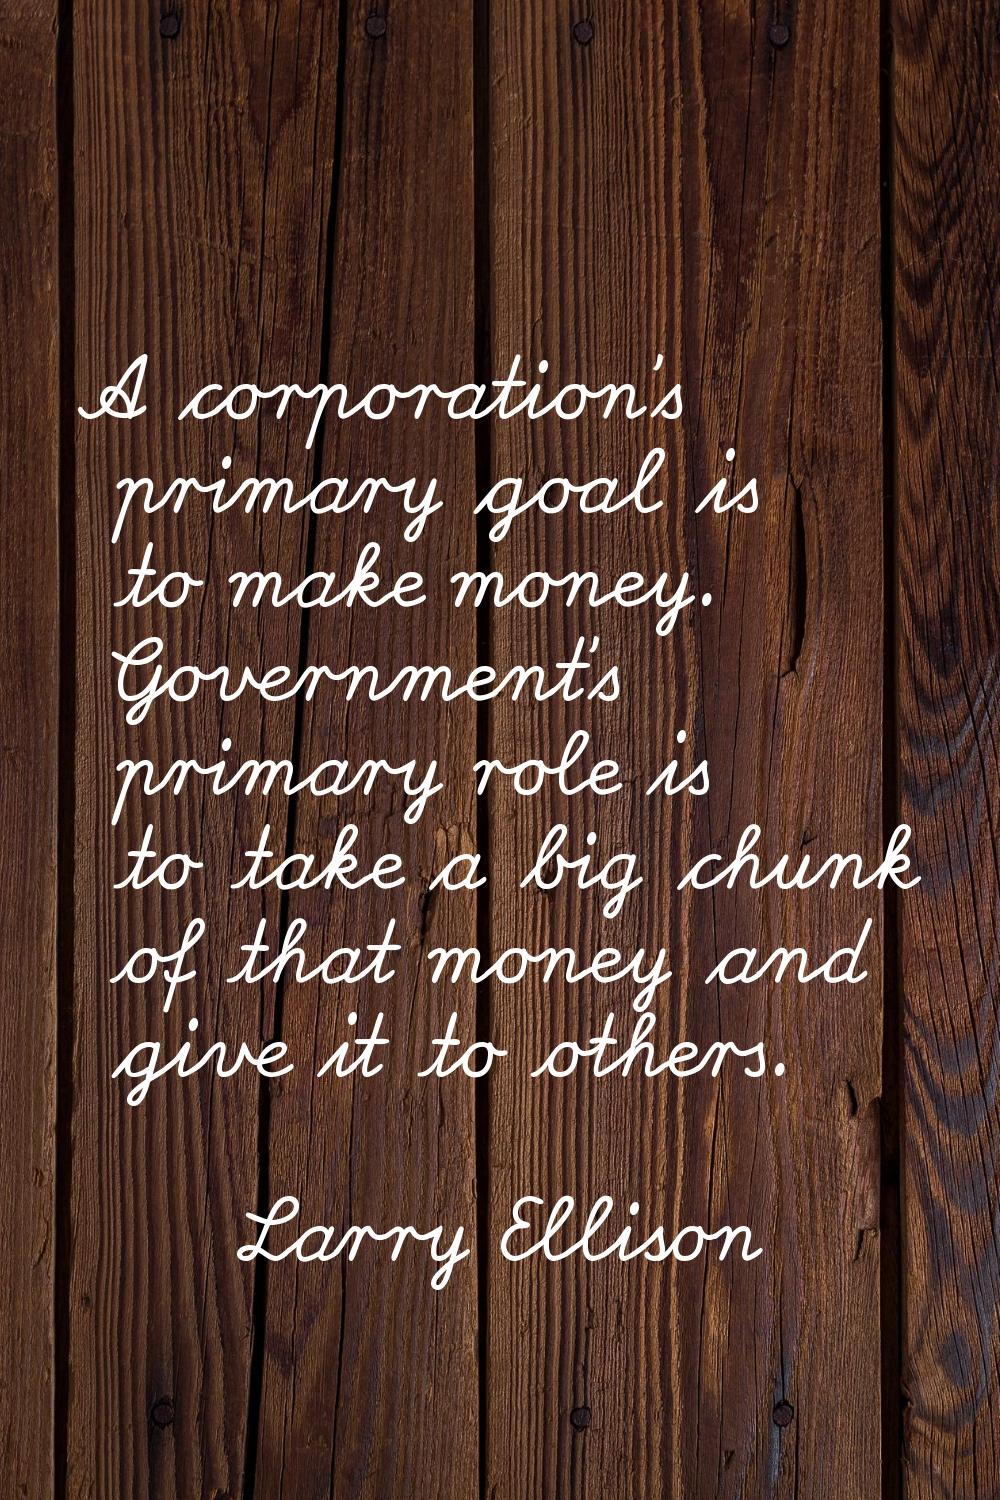 A corporation's primary goal is to make money. Government's primary role is to take a big chunk of 